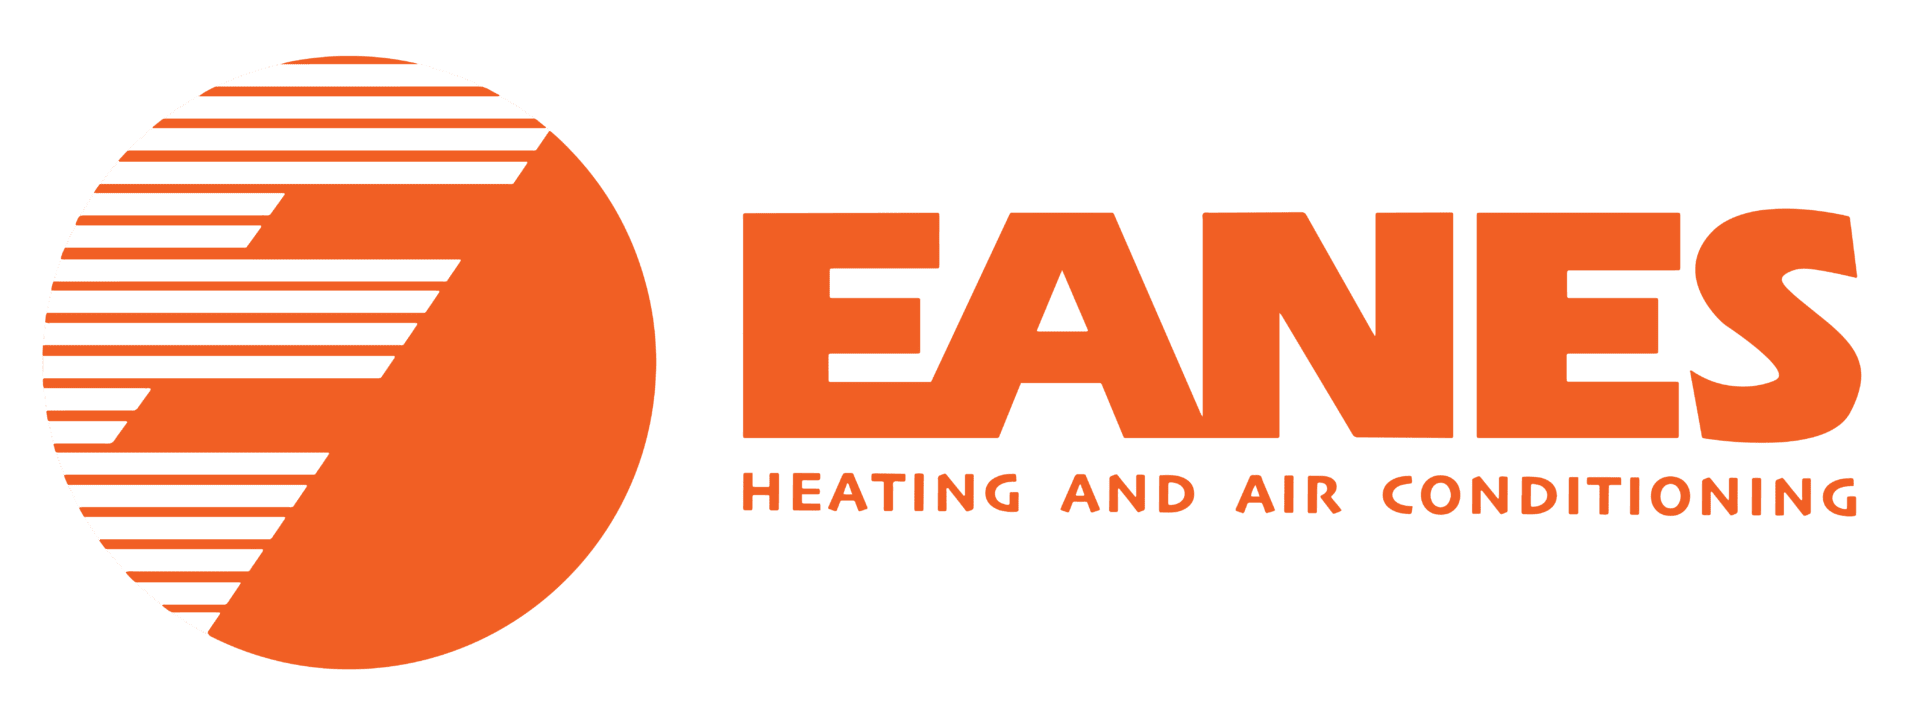 Eanes Heating and Air Conditioning